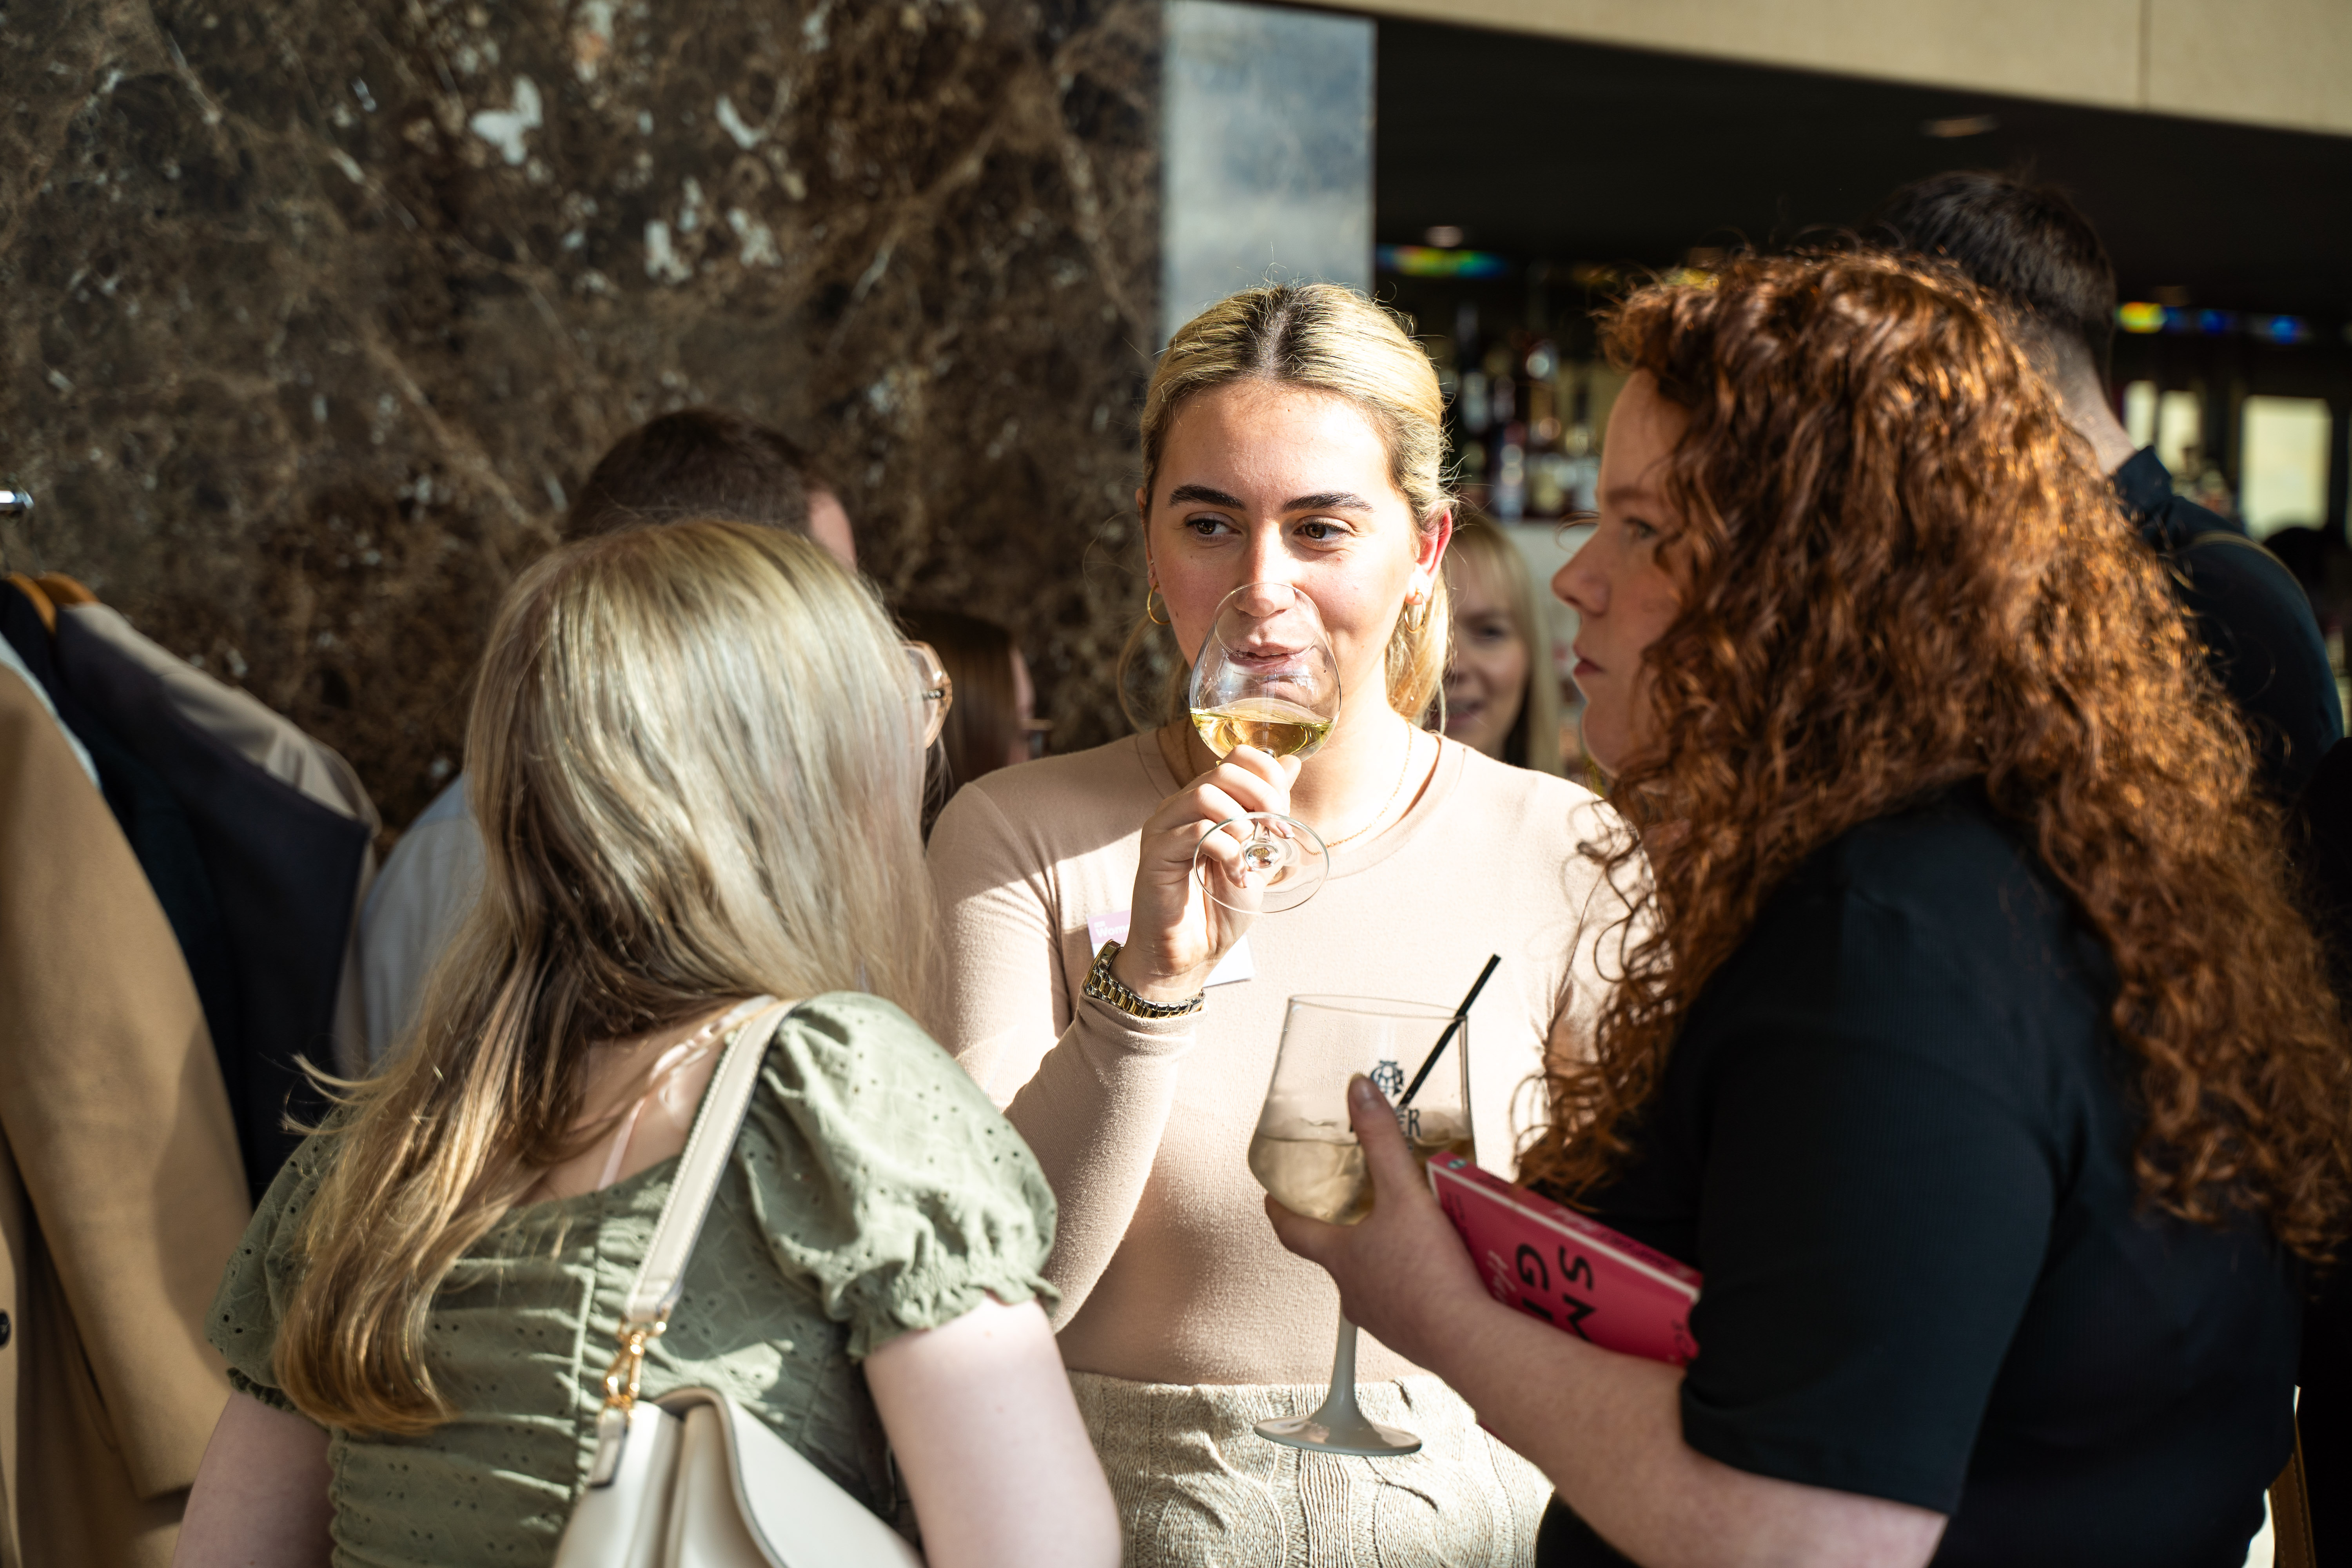 LWC Drinks’ Women’s Network hosts it’s first in-person meet-up in aid of International Women’s Day